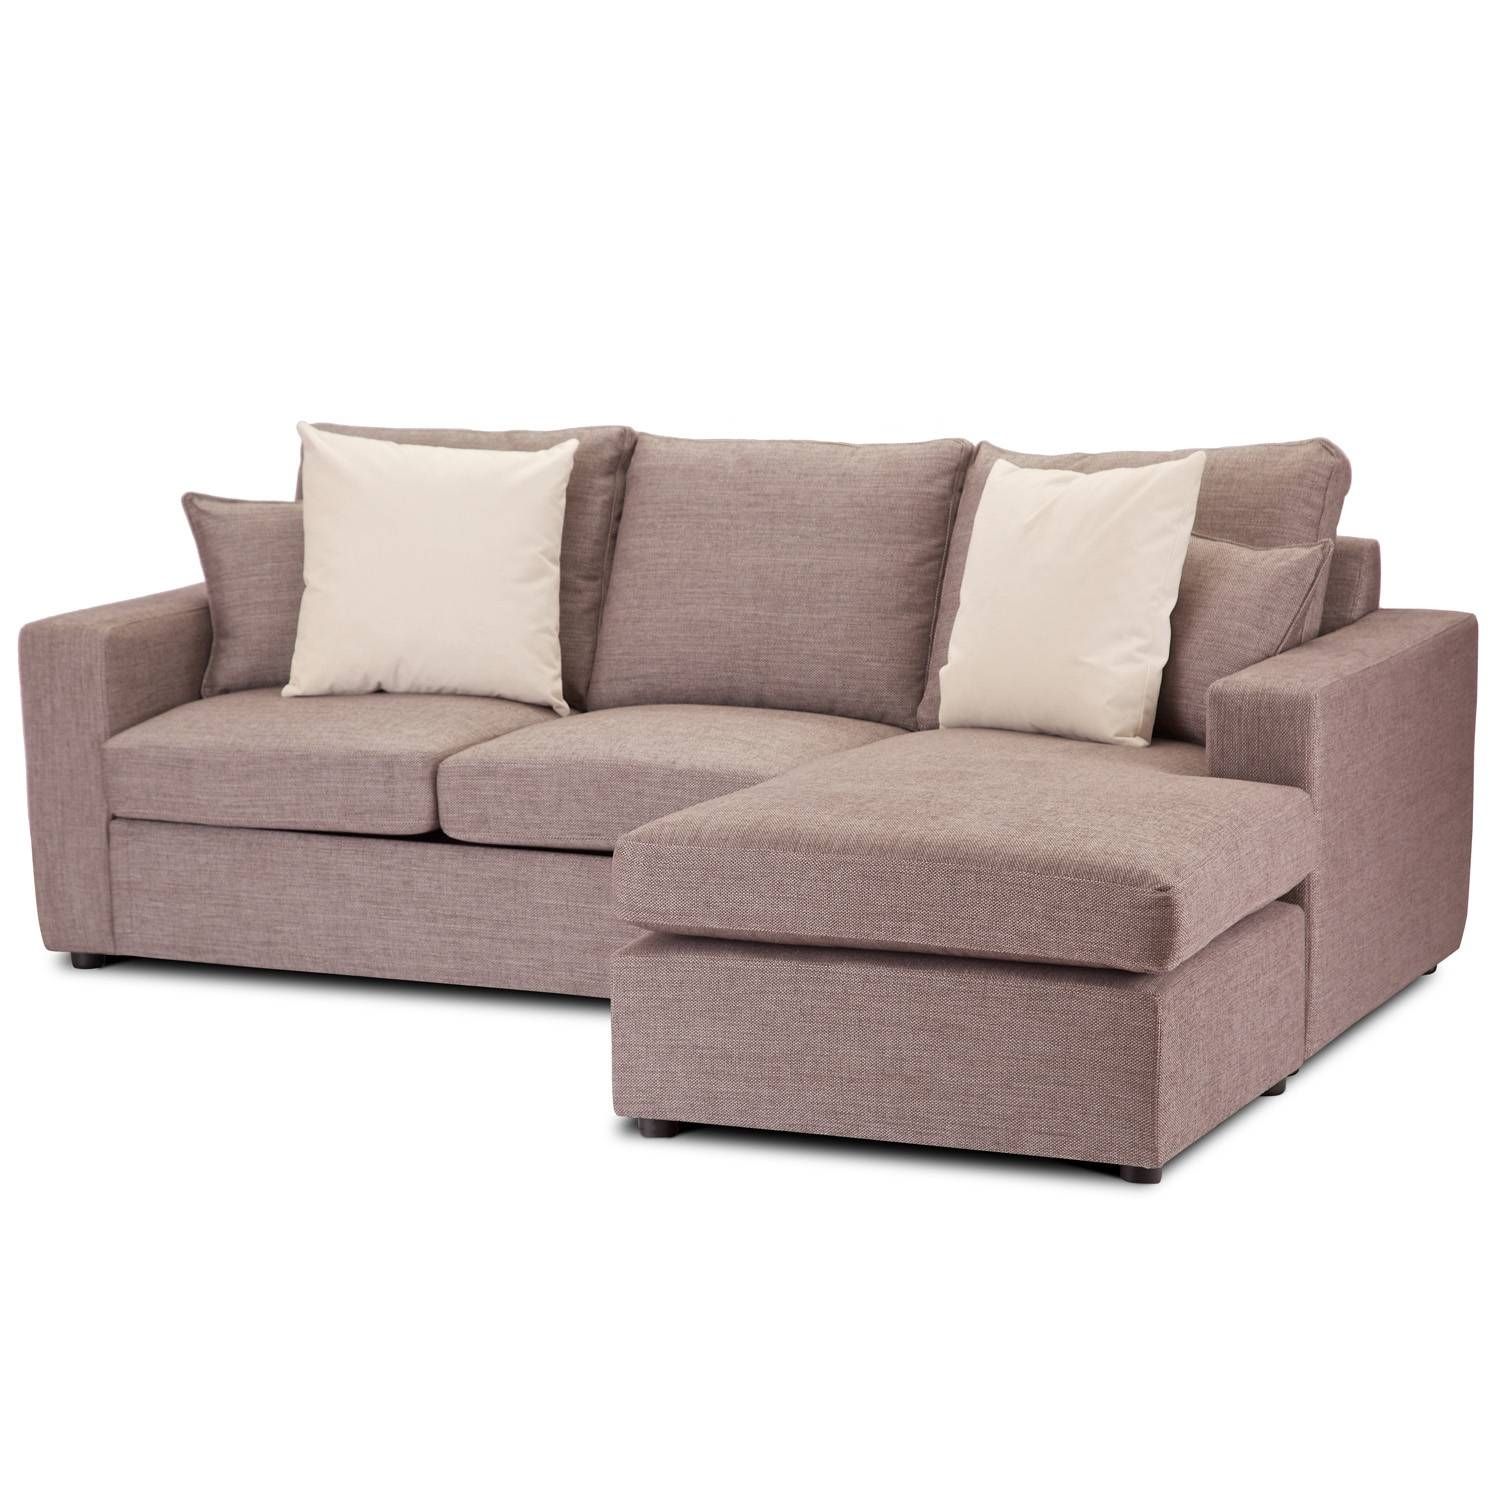 Furniture: Sectional Sofa Bed | Camden Sofa | Walmart Loveseat Throughout Cheap Sofa Beds (View 10 of 30)